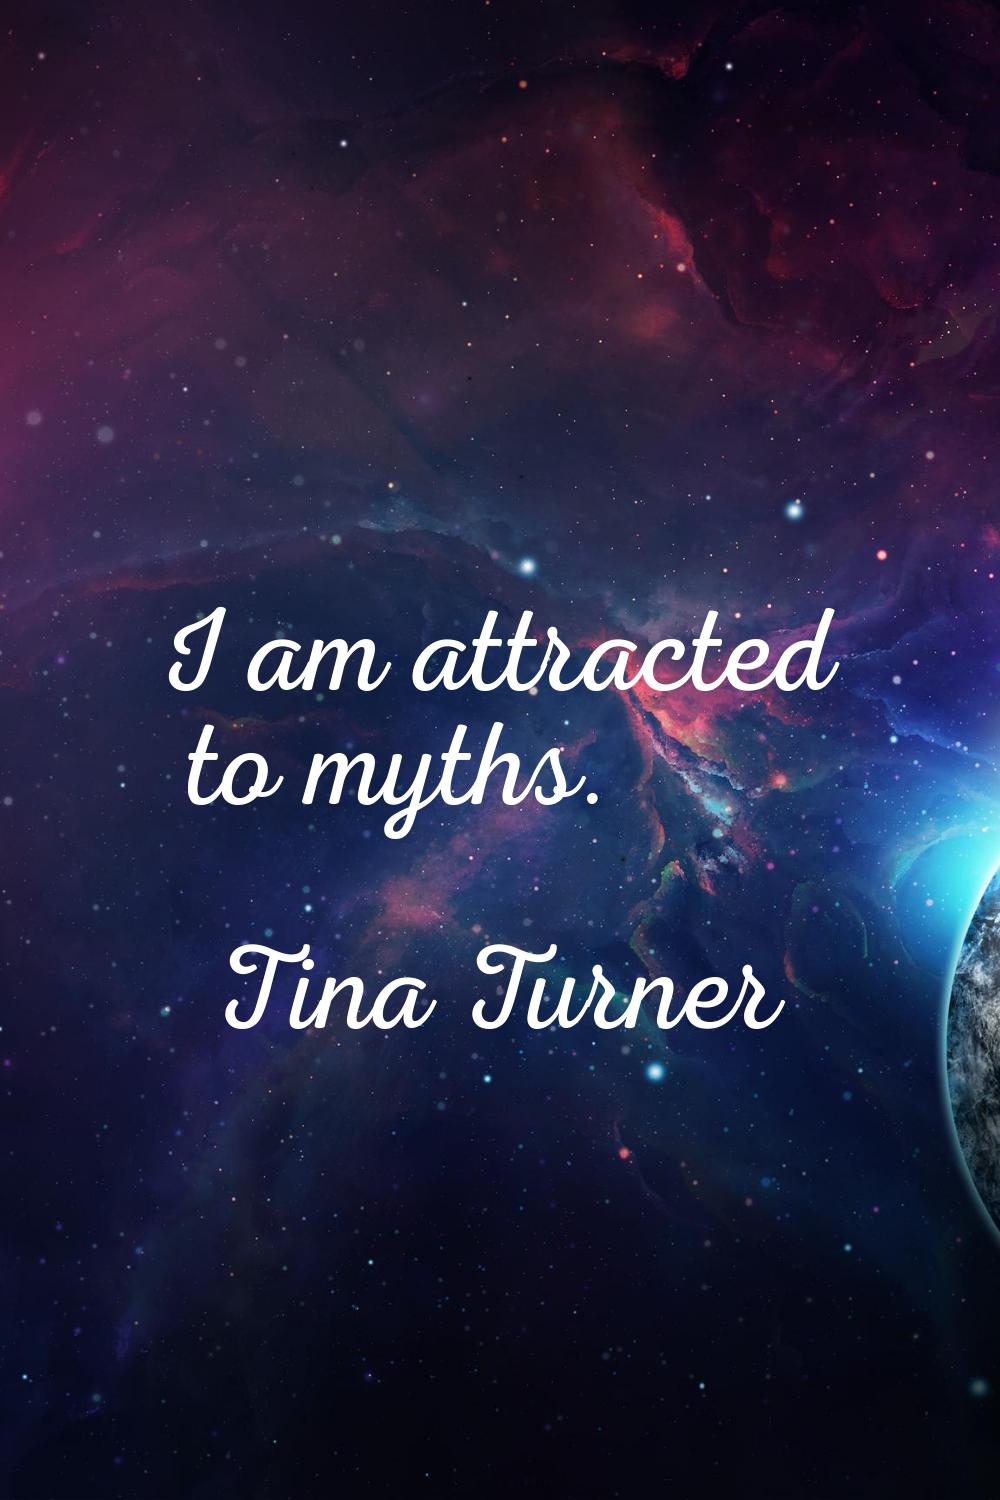 I am attracted to myths.